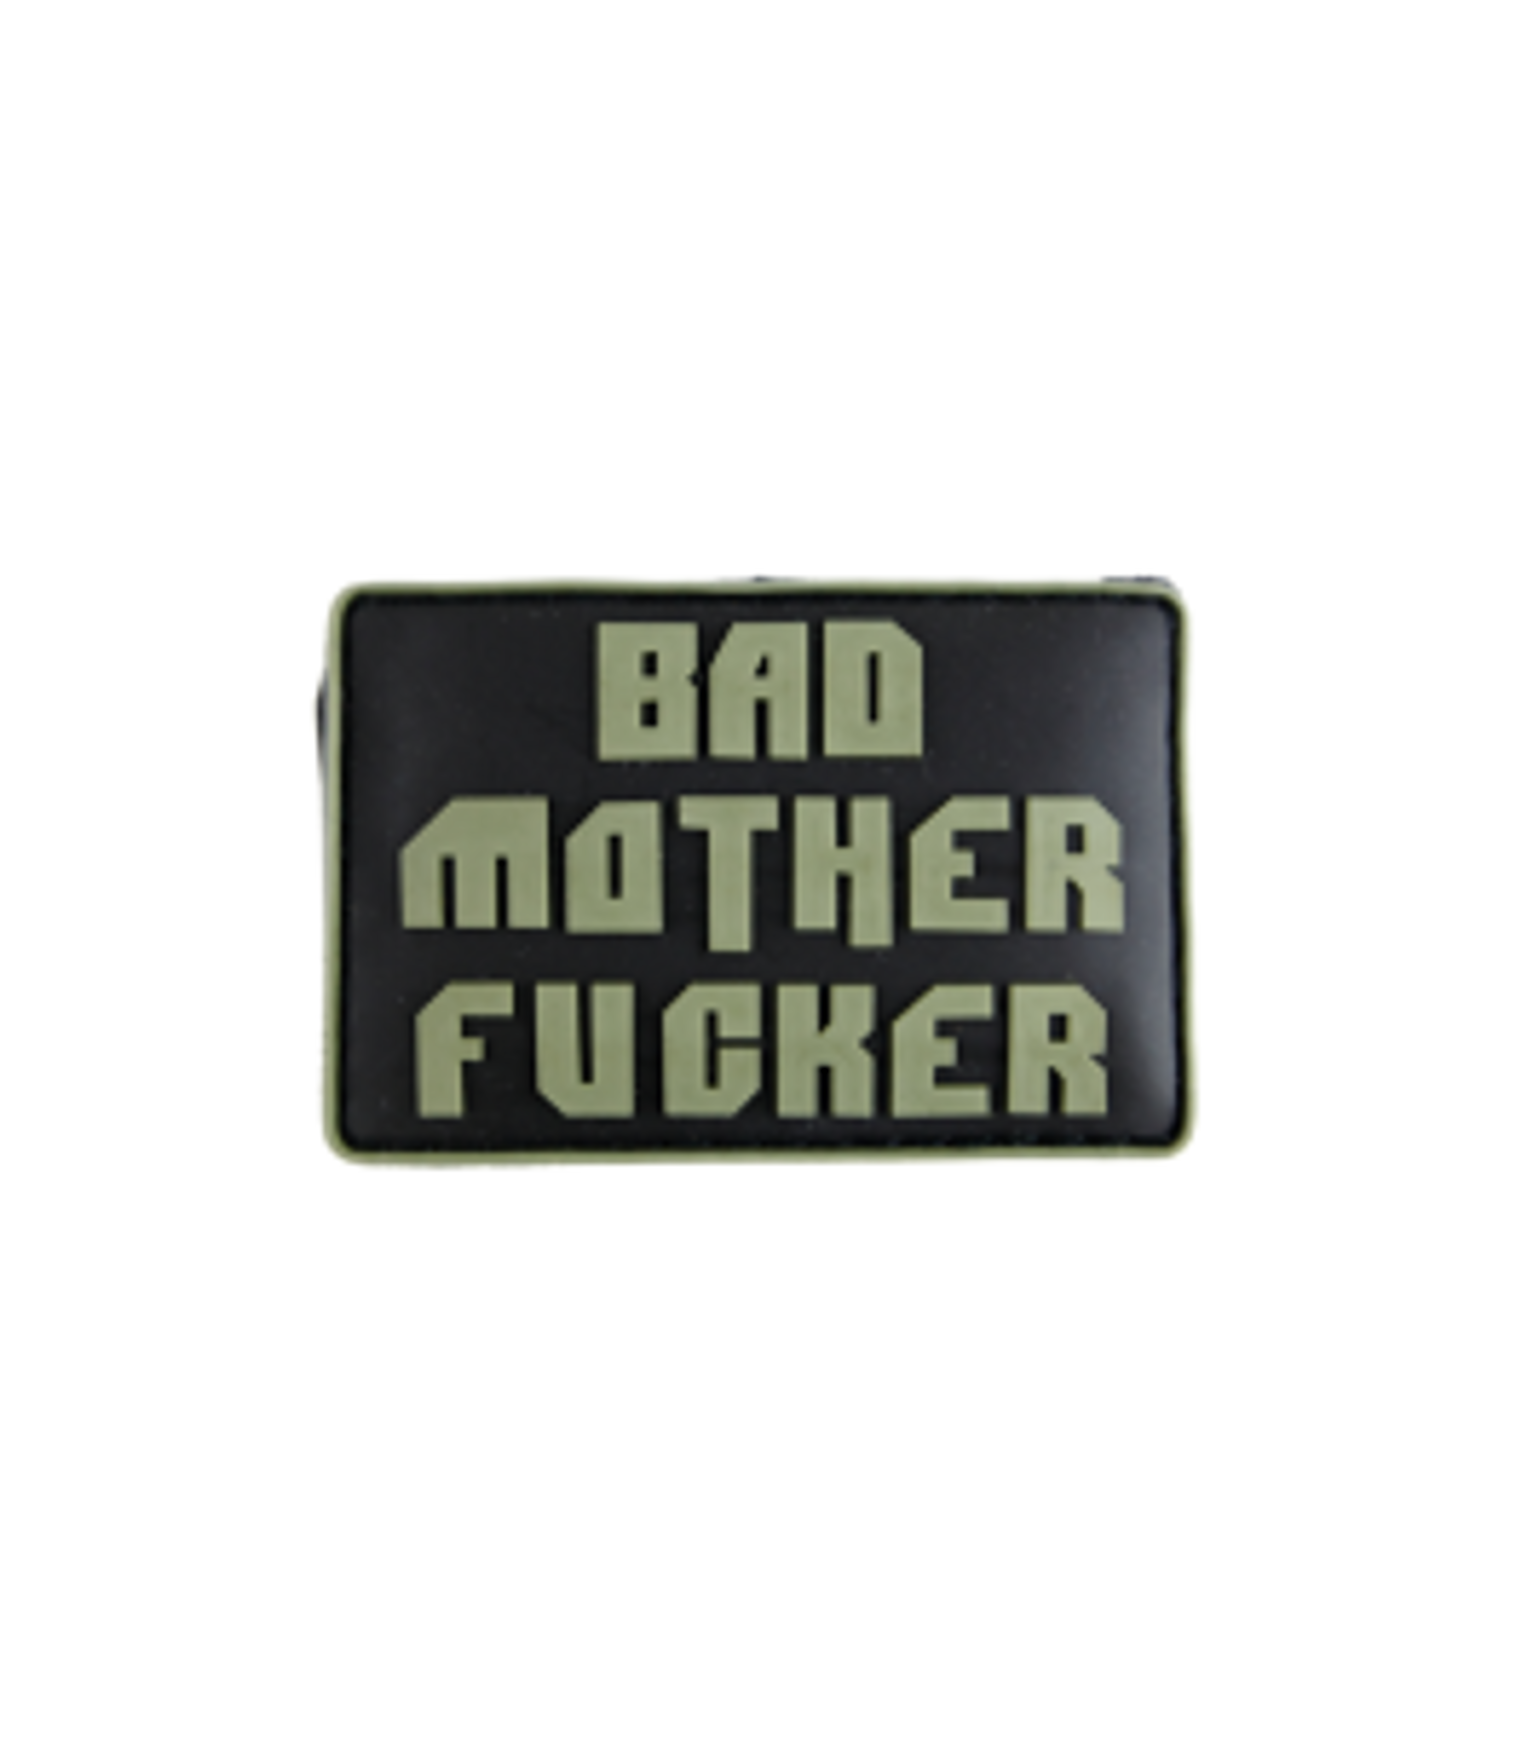 Bad Mother Fucker - Olive Drab - Morale Patch